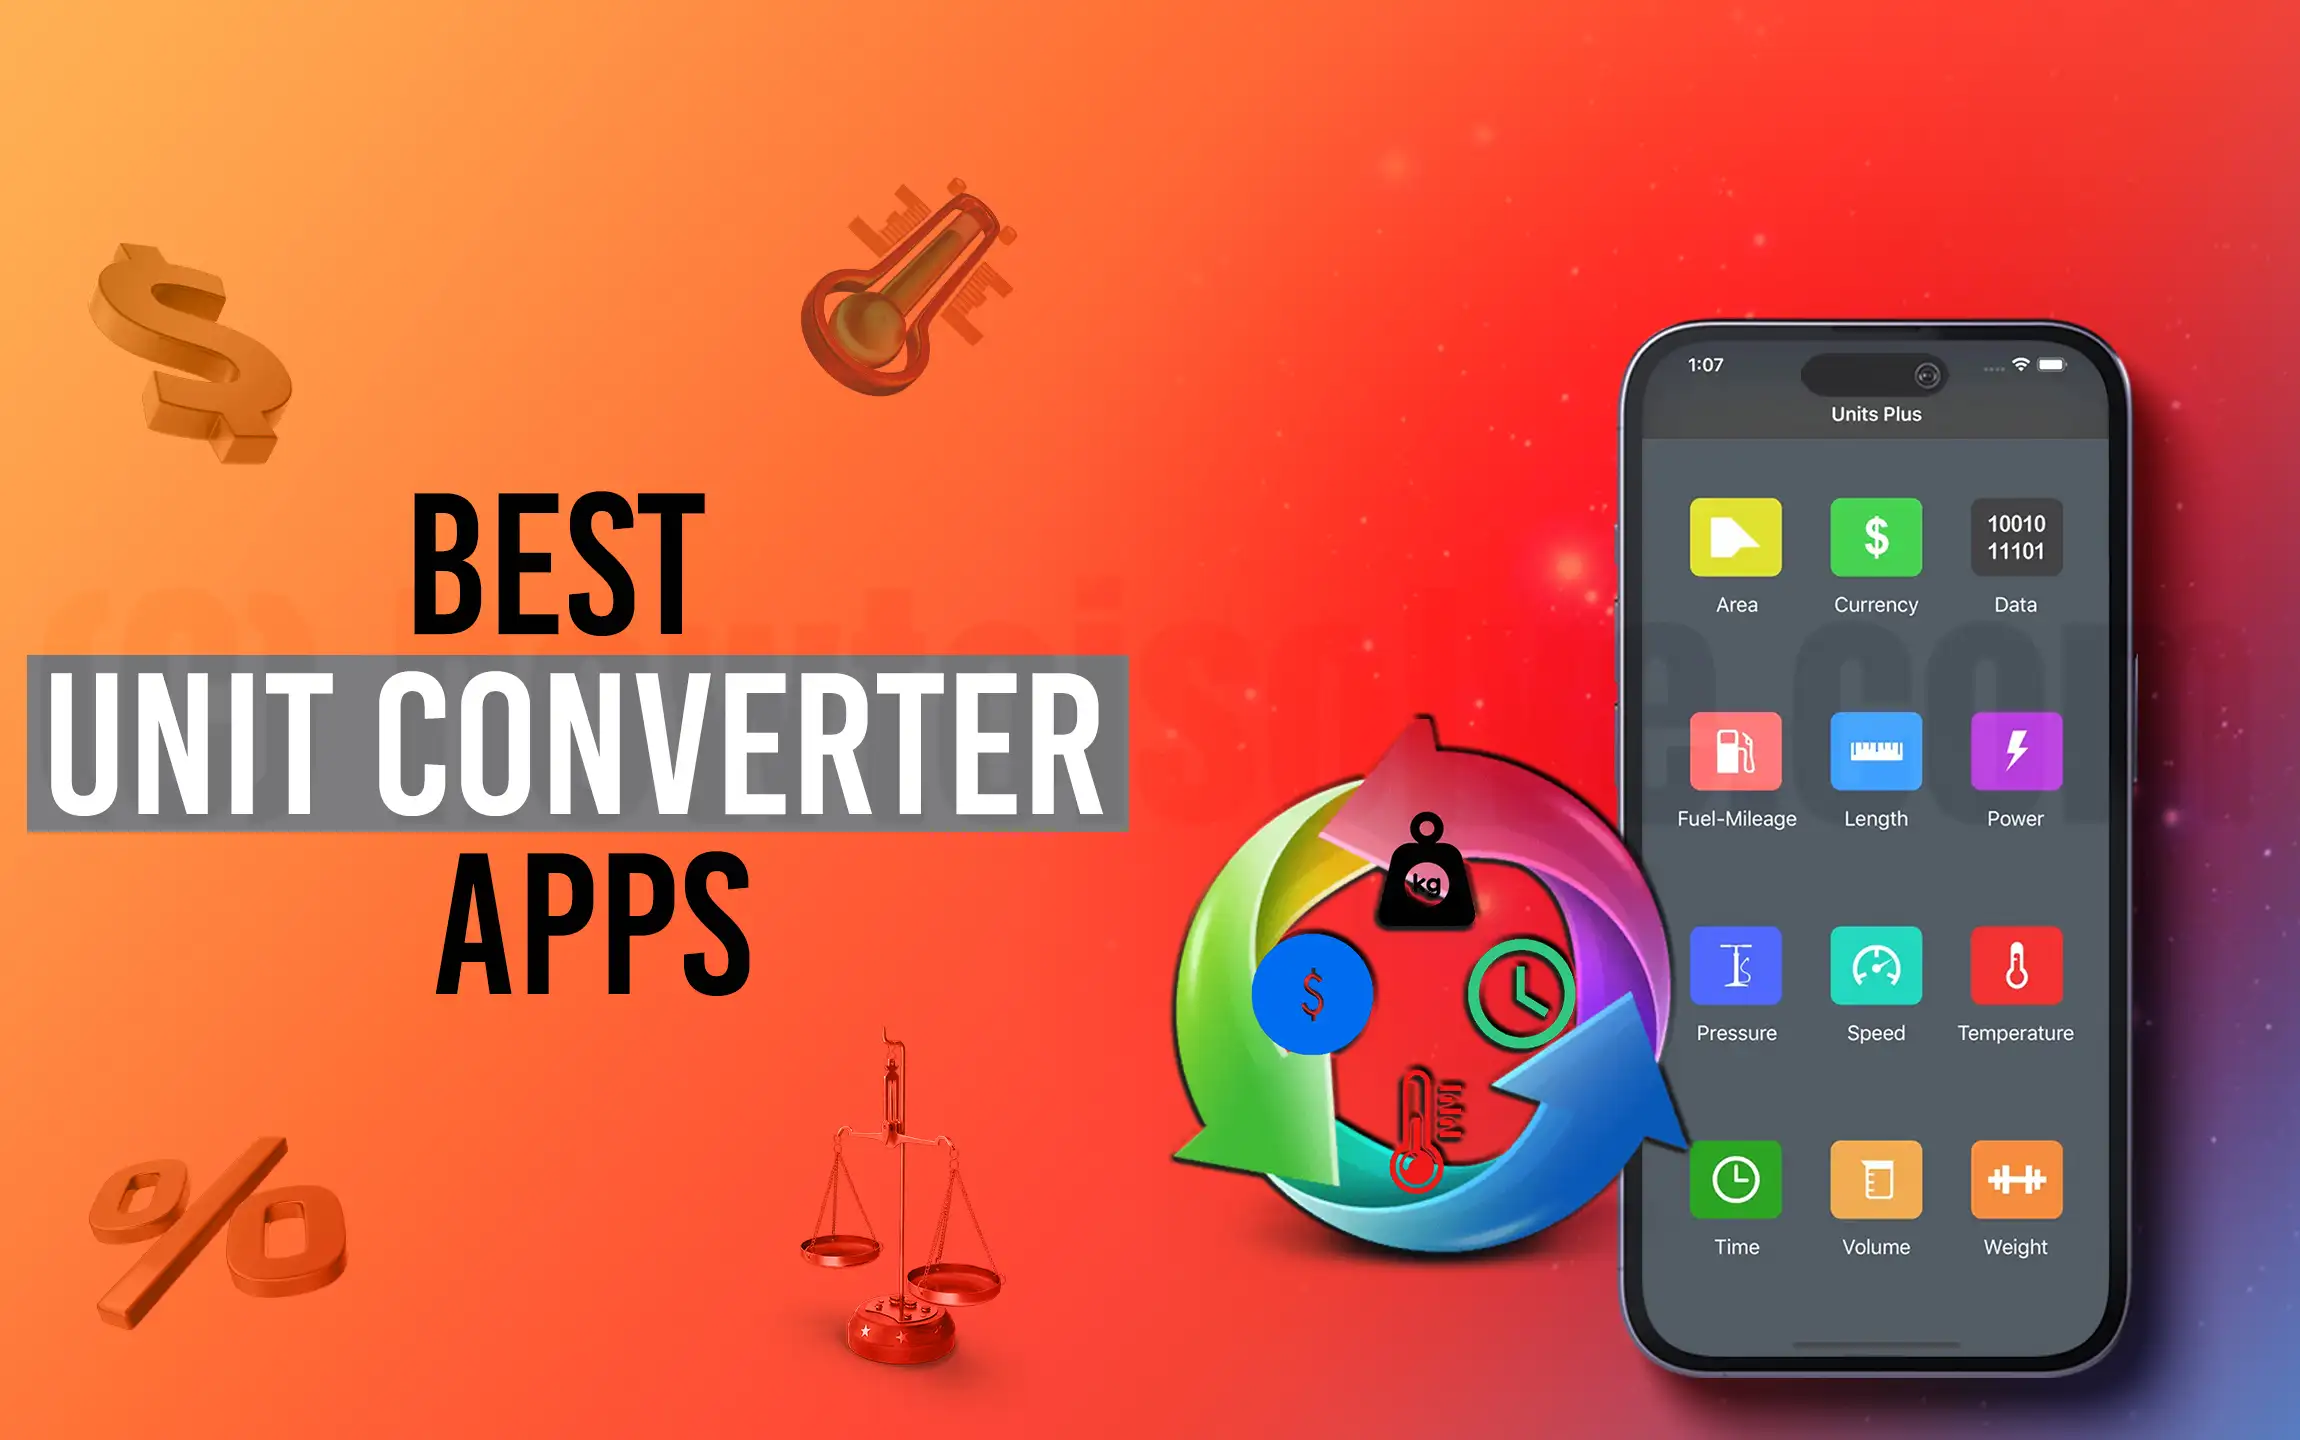 Best unit converter apps for iPhone